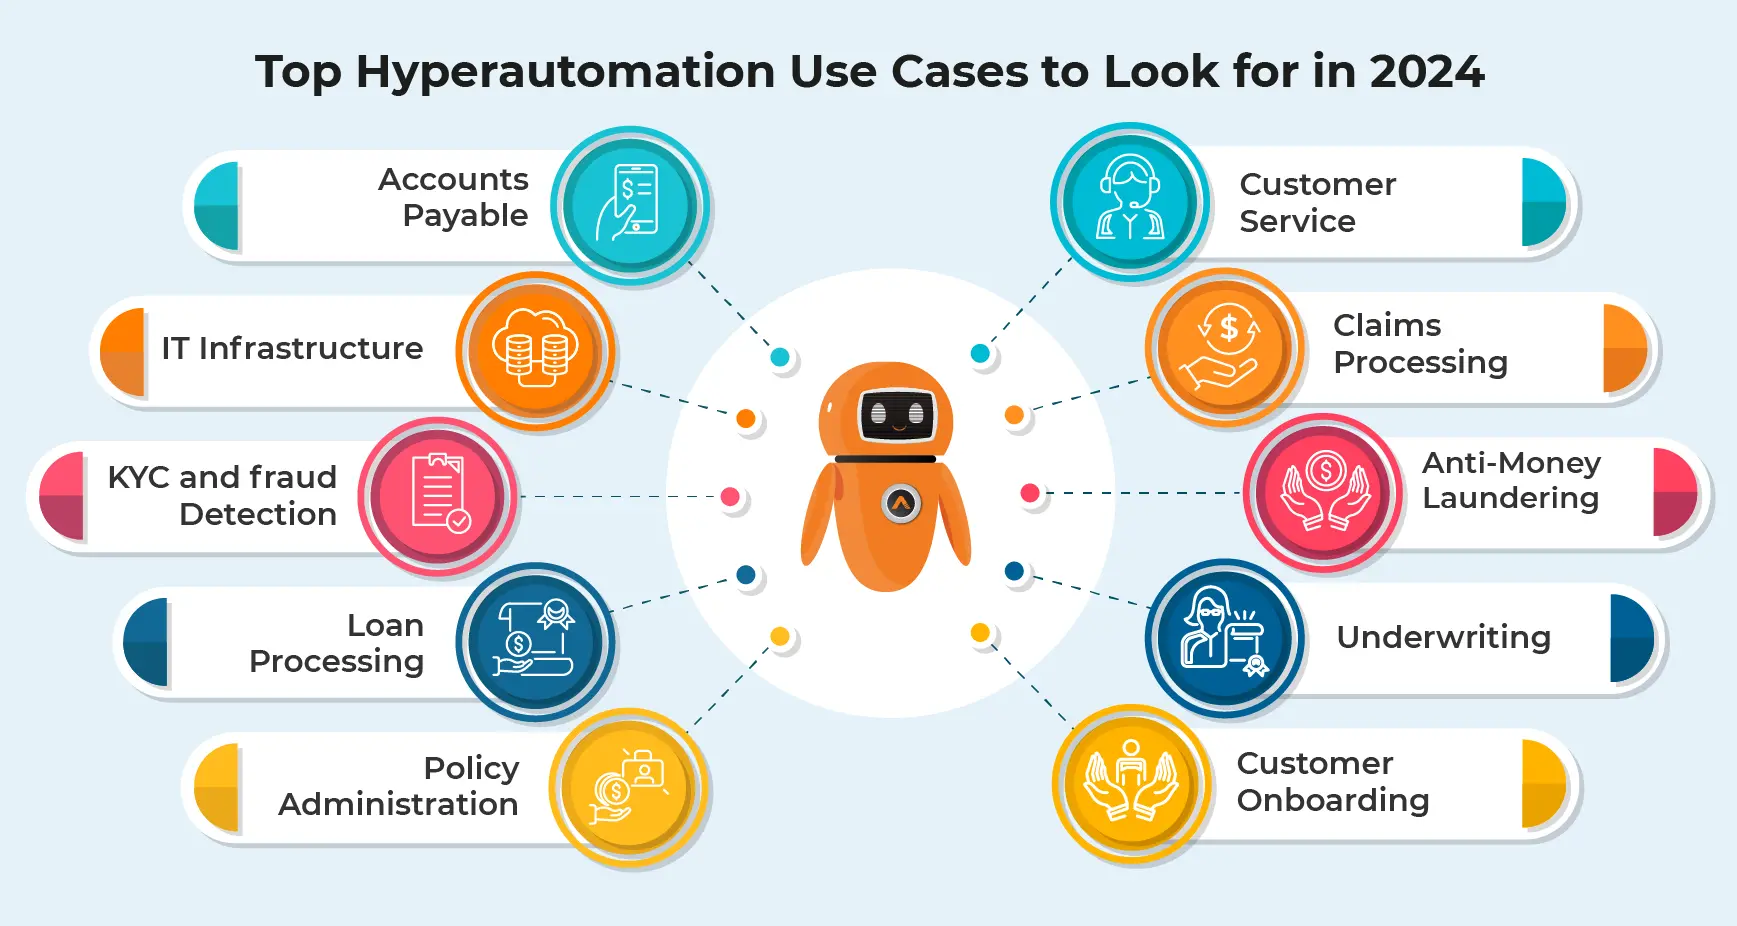 Top Hyperautomation Use Cases to Look for in 2023